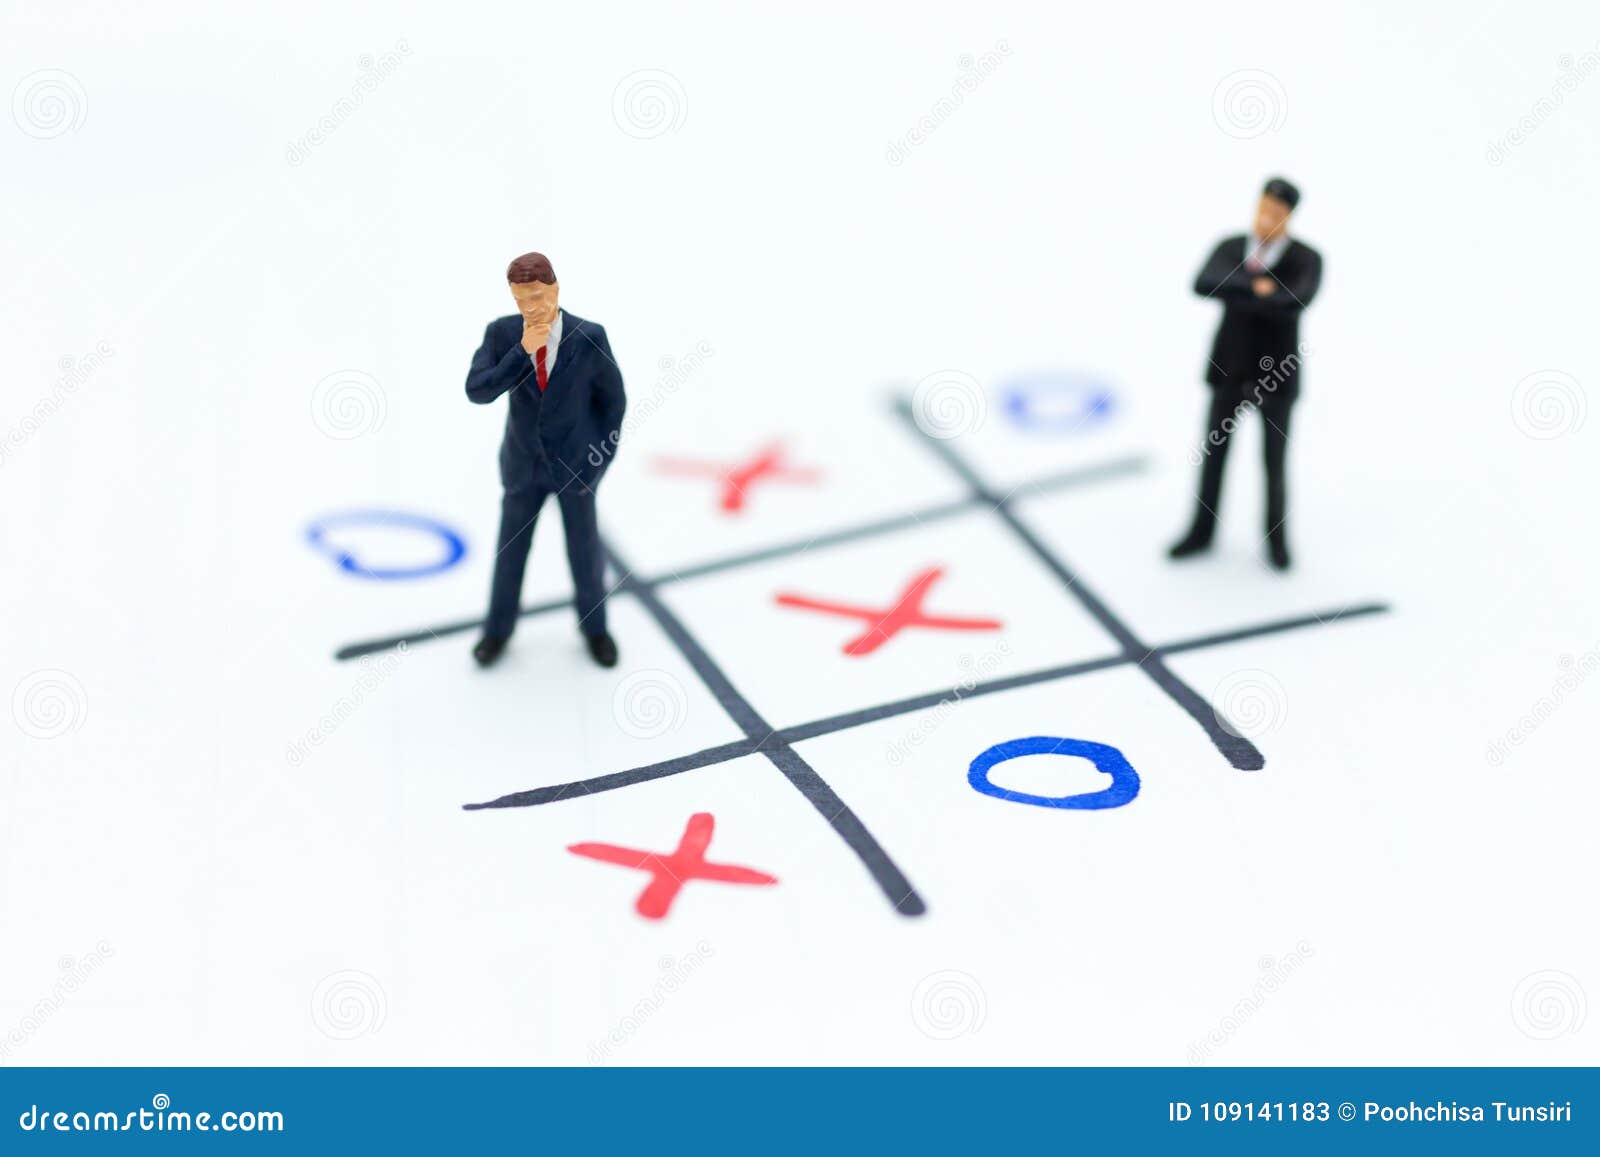 miniature people: businessmen stand on xo game board. image use for business competition concept